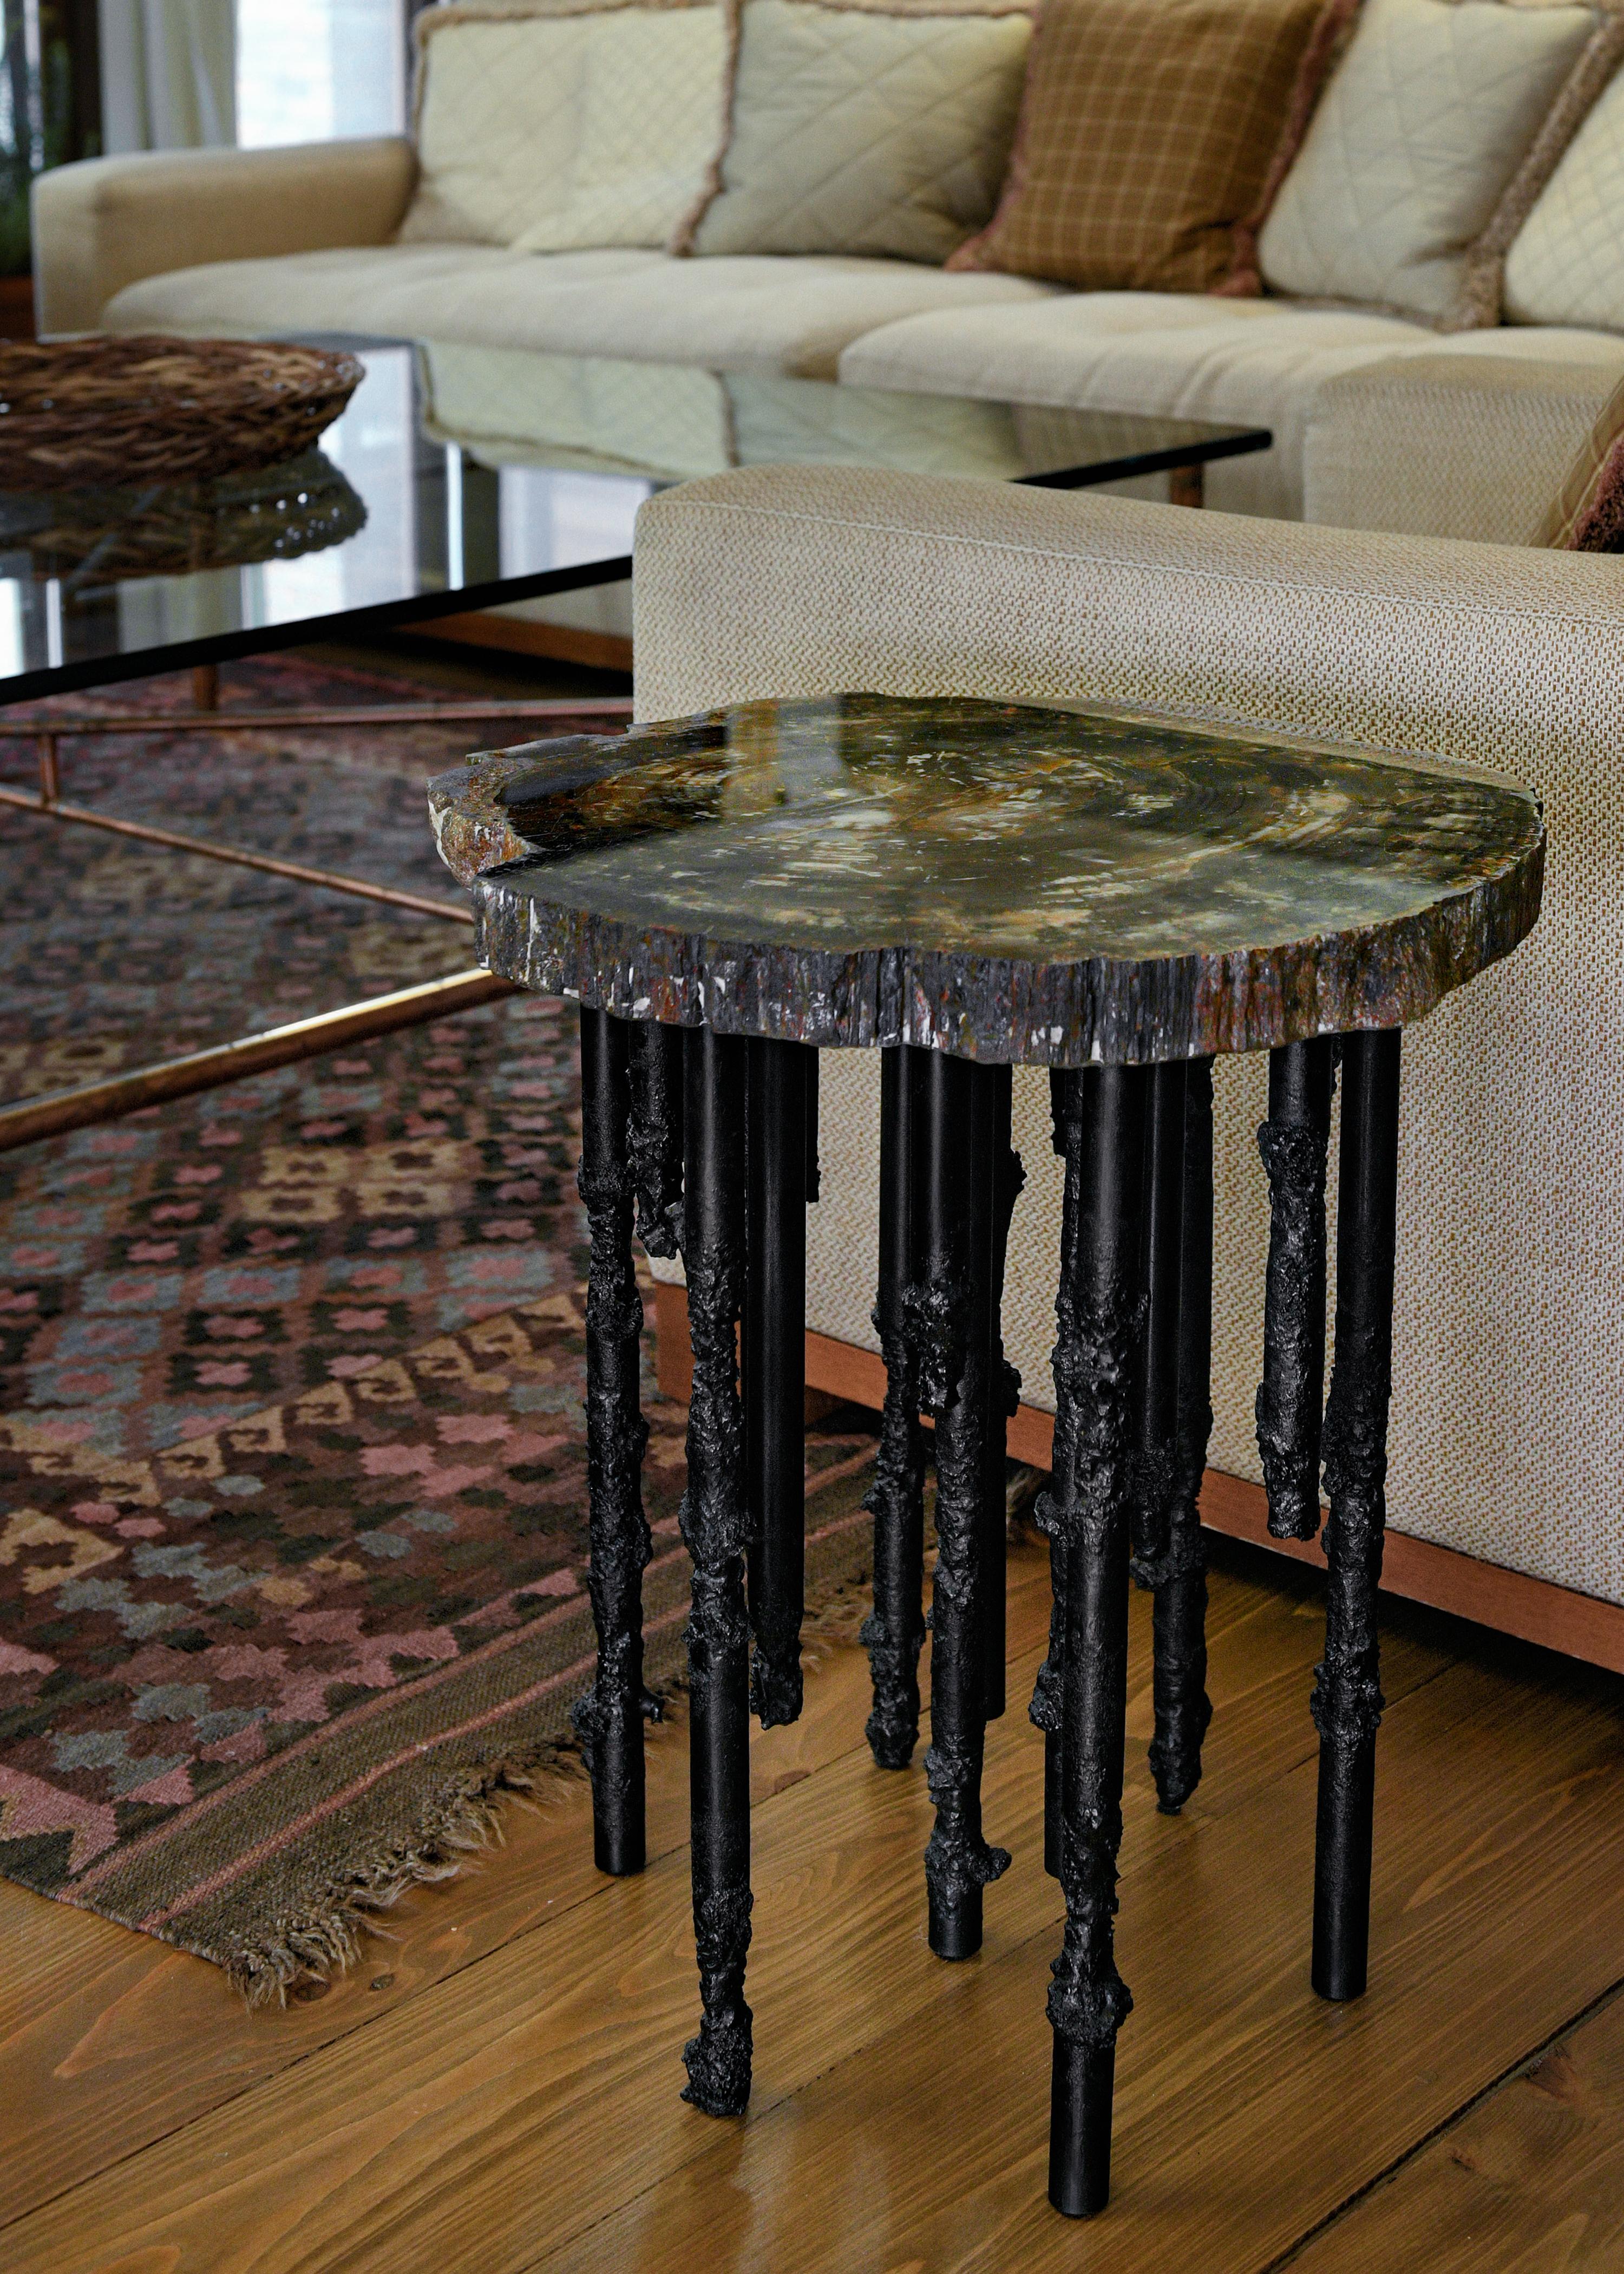 Topped with a 20 million year old slab of Arizona Petrified Wood, the Cosmos table is a unique, one of a kind sculptural side table base made with hand wrought and sculpted iron legs. Made to resemble a forest of stalactites each leg is as